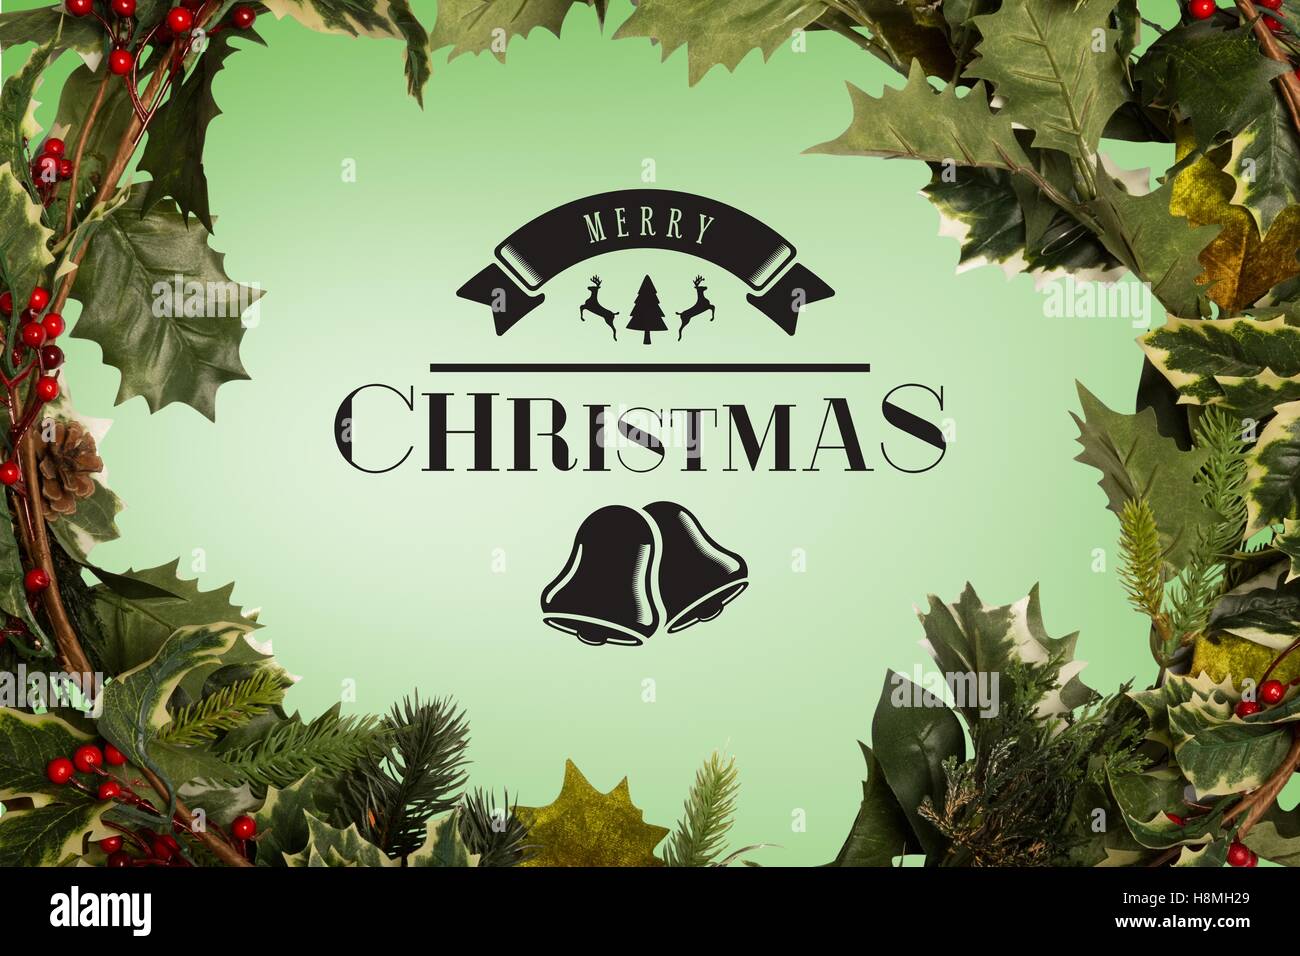 Christmas Message on Green Background Design Stock Photo